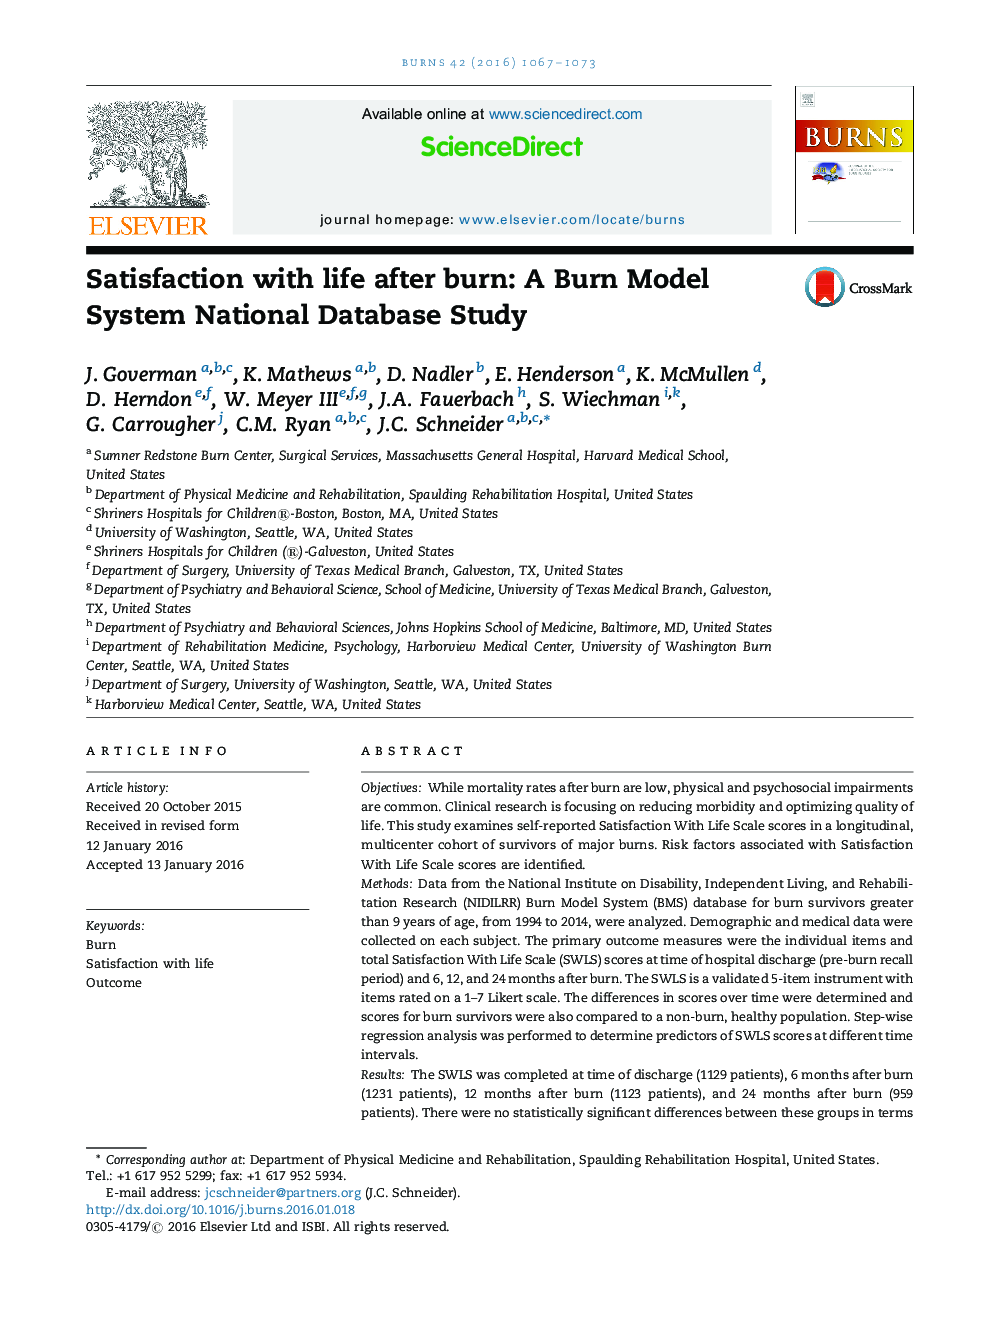 Satisfaction with life after burn: A Burn Model System National Database Study